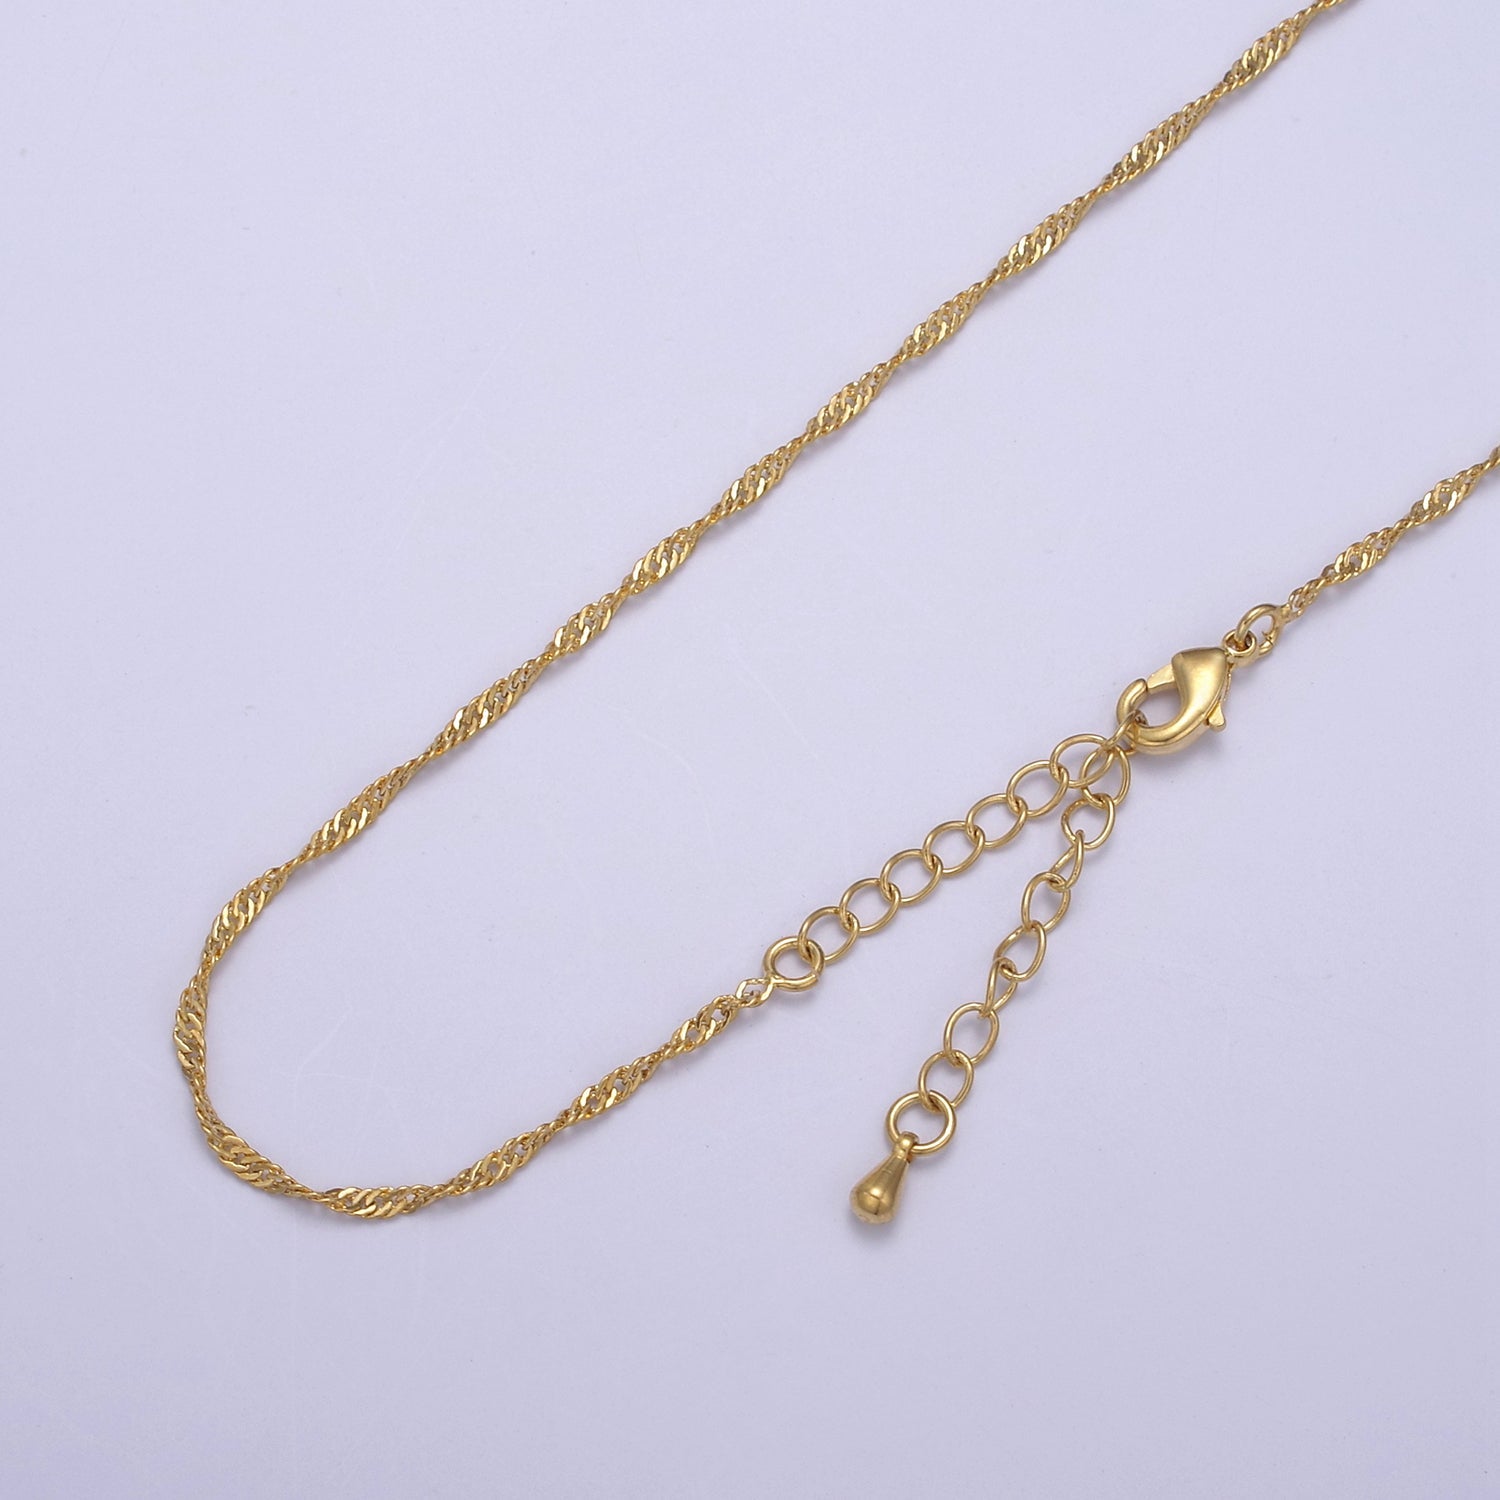 Wholesale 14K Gold Filled Yellow Gold Diamond Cut Singapore Chain 1.7mm Thin Dainty Delicate Necklace, Layered Necklace WA-727 - DLUXCA